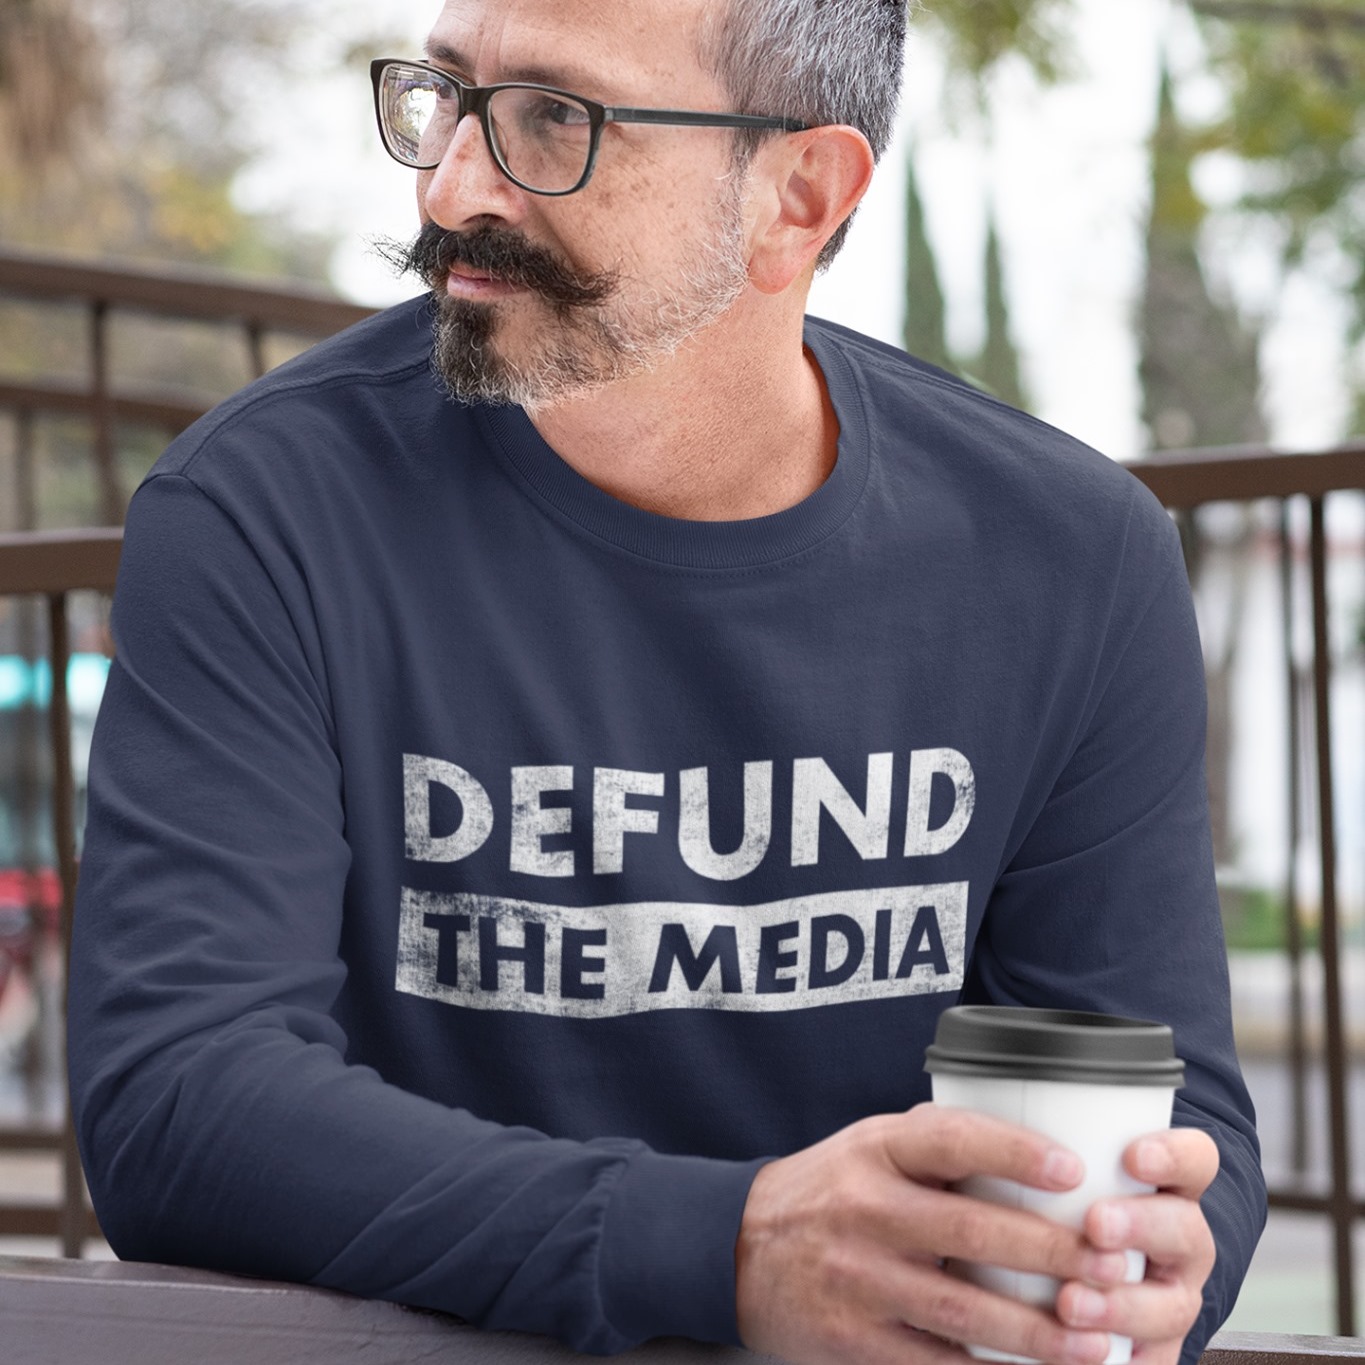 Defund the media - Social media, news and newspaper